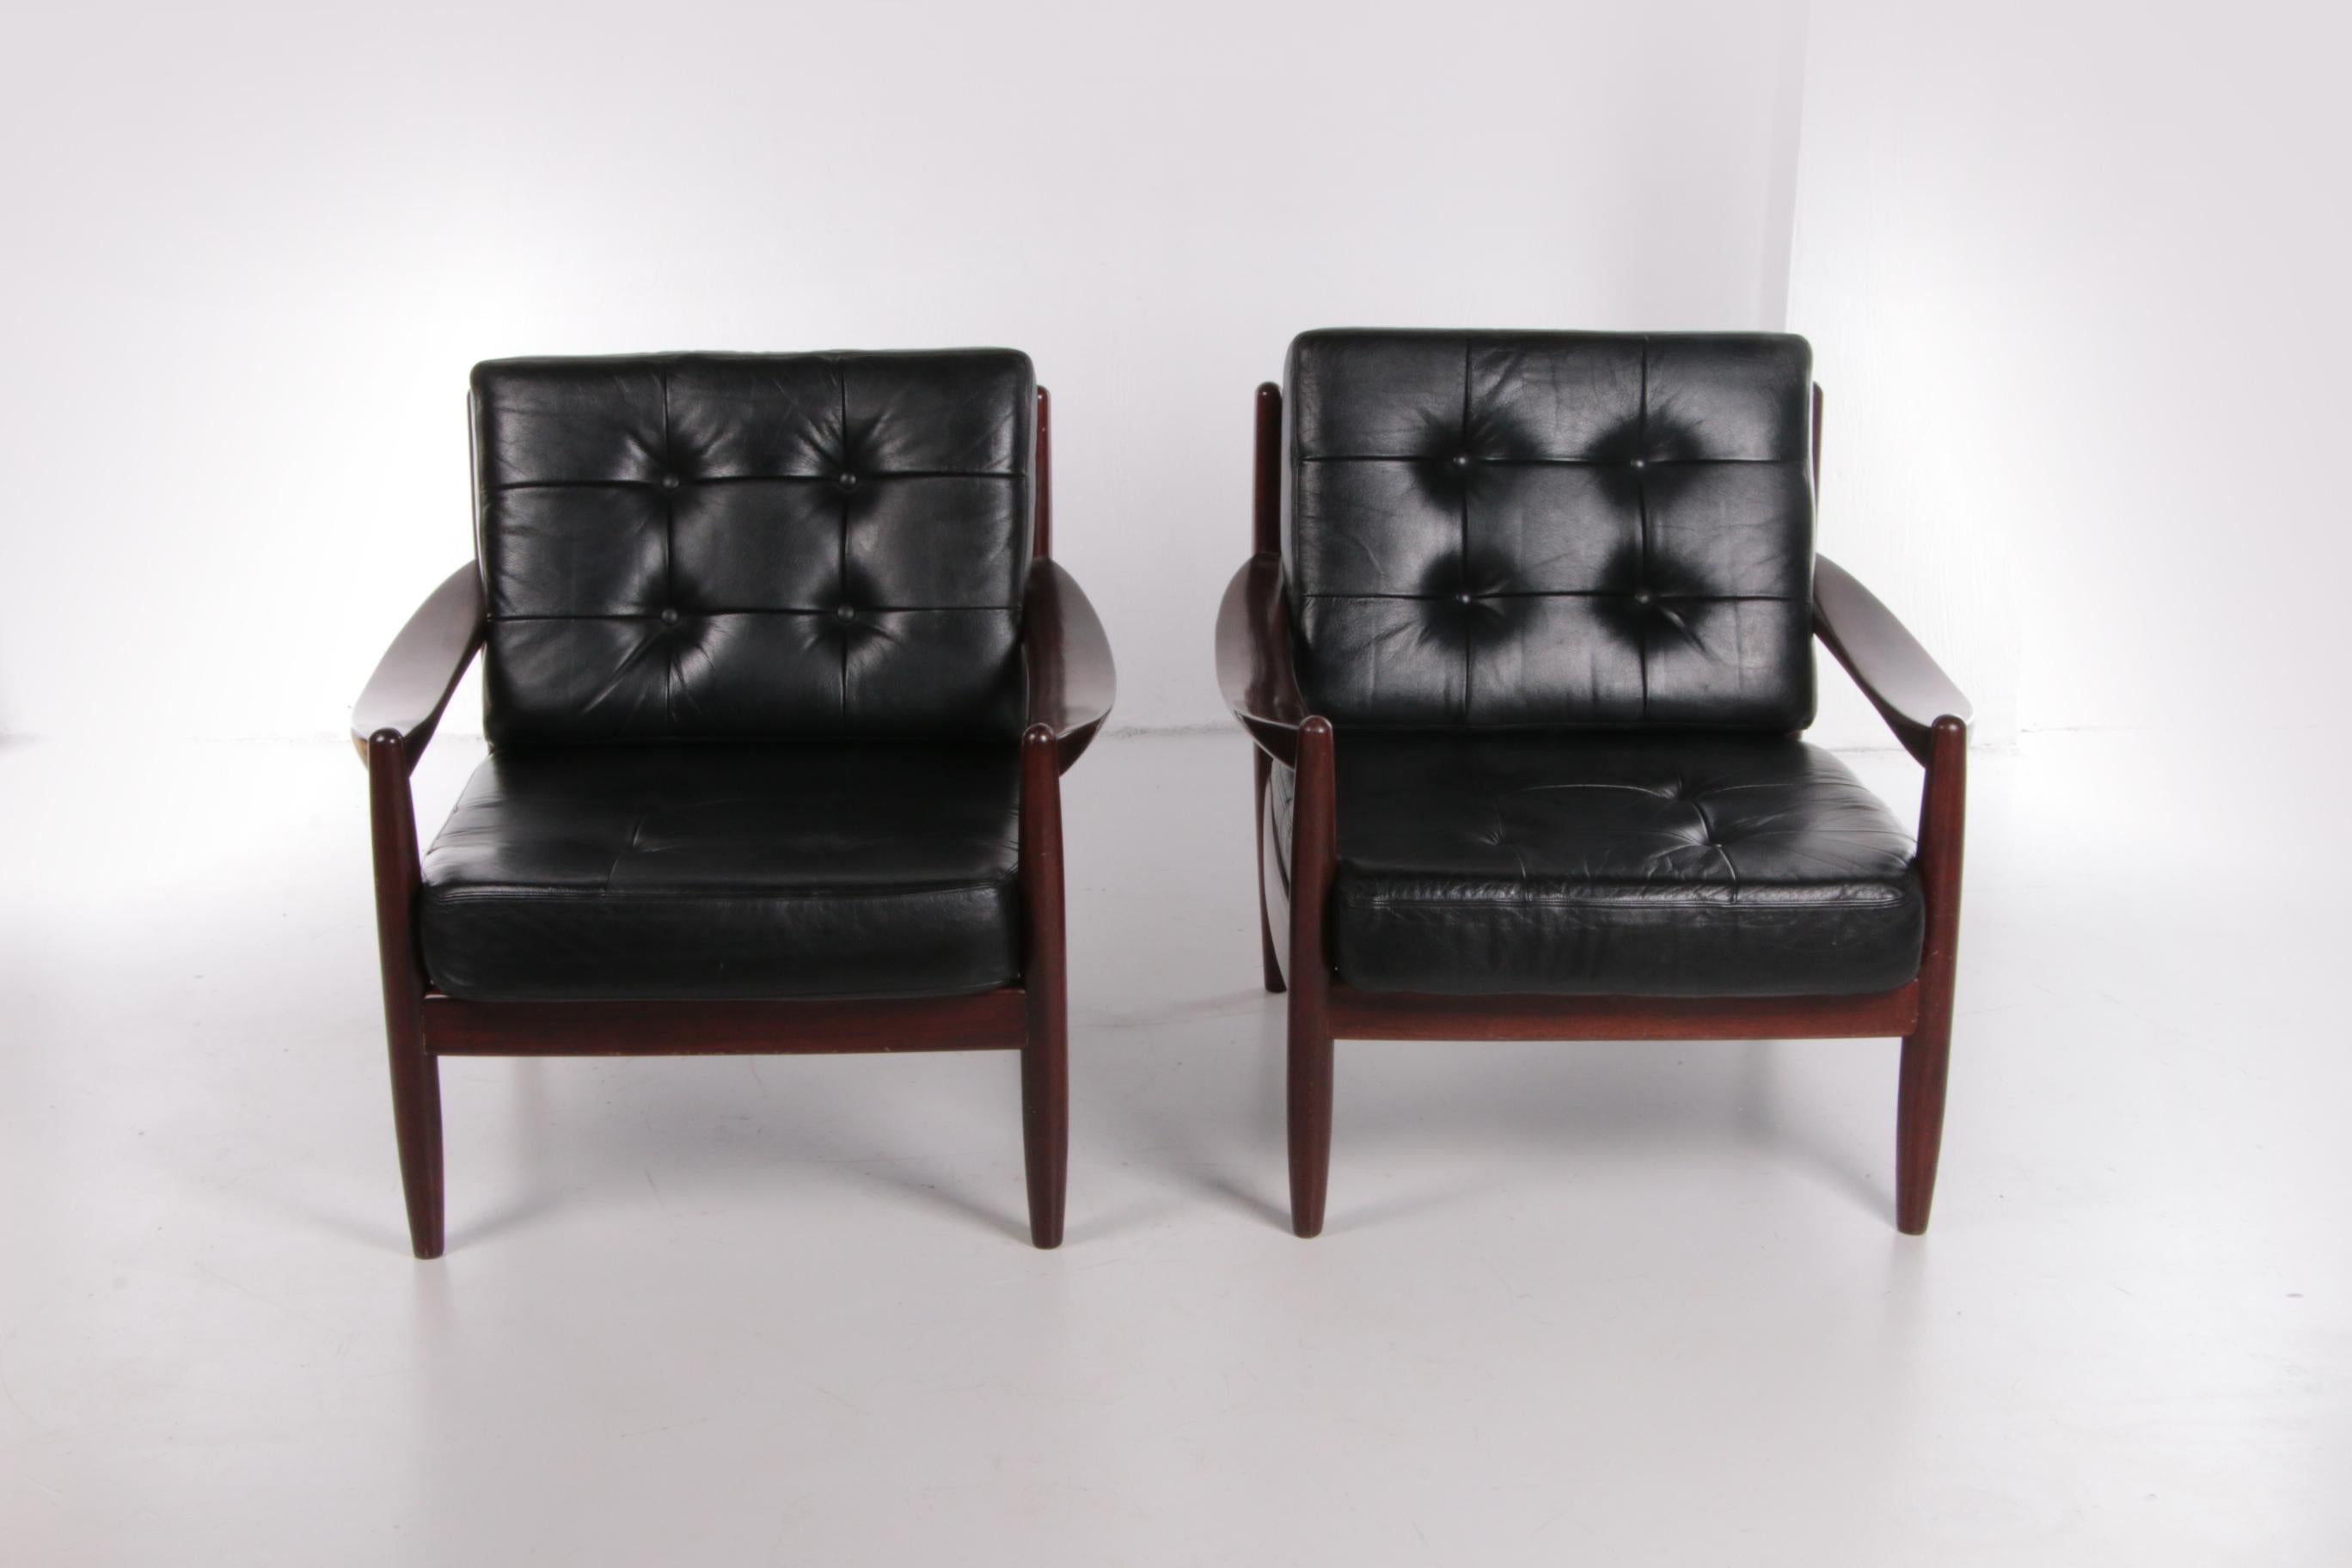 A vintage set of two beautiful dark wooden armchairs. Both chairs have a simple and luxurious Scandinavian design.

The armchairs were produced in the 1960s and originally come from Denmark.

The chairs consist of high-quality padded black